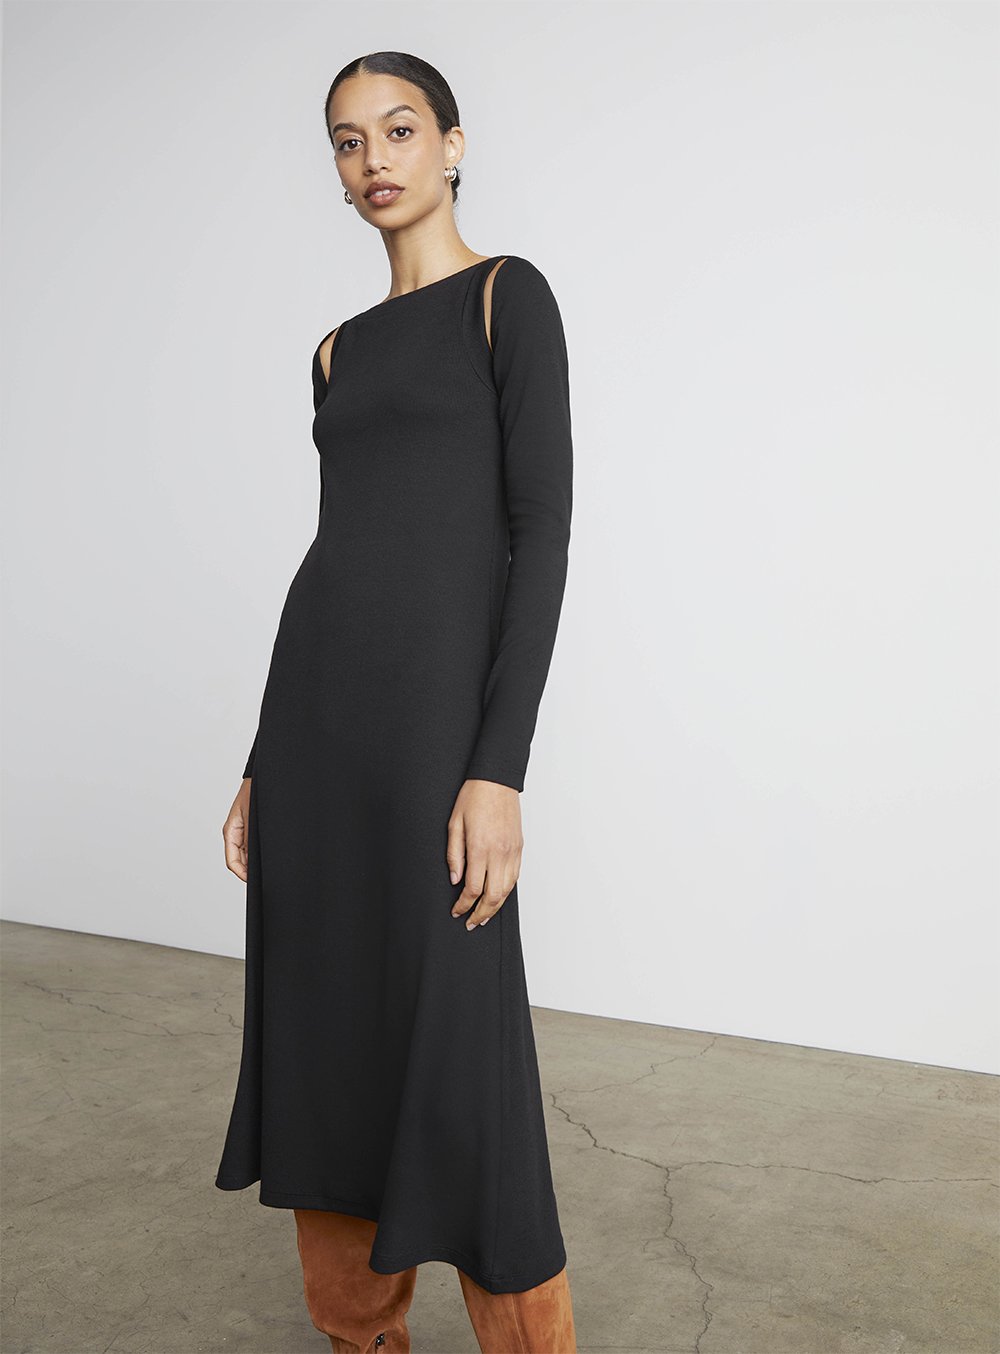 Best Fall Maxi Dresses in Every Style ...